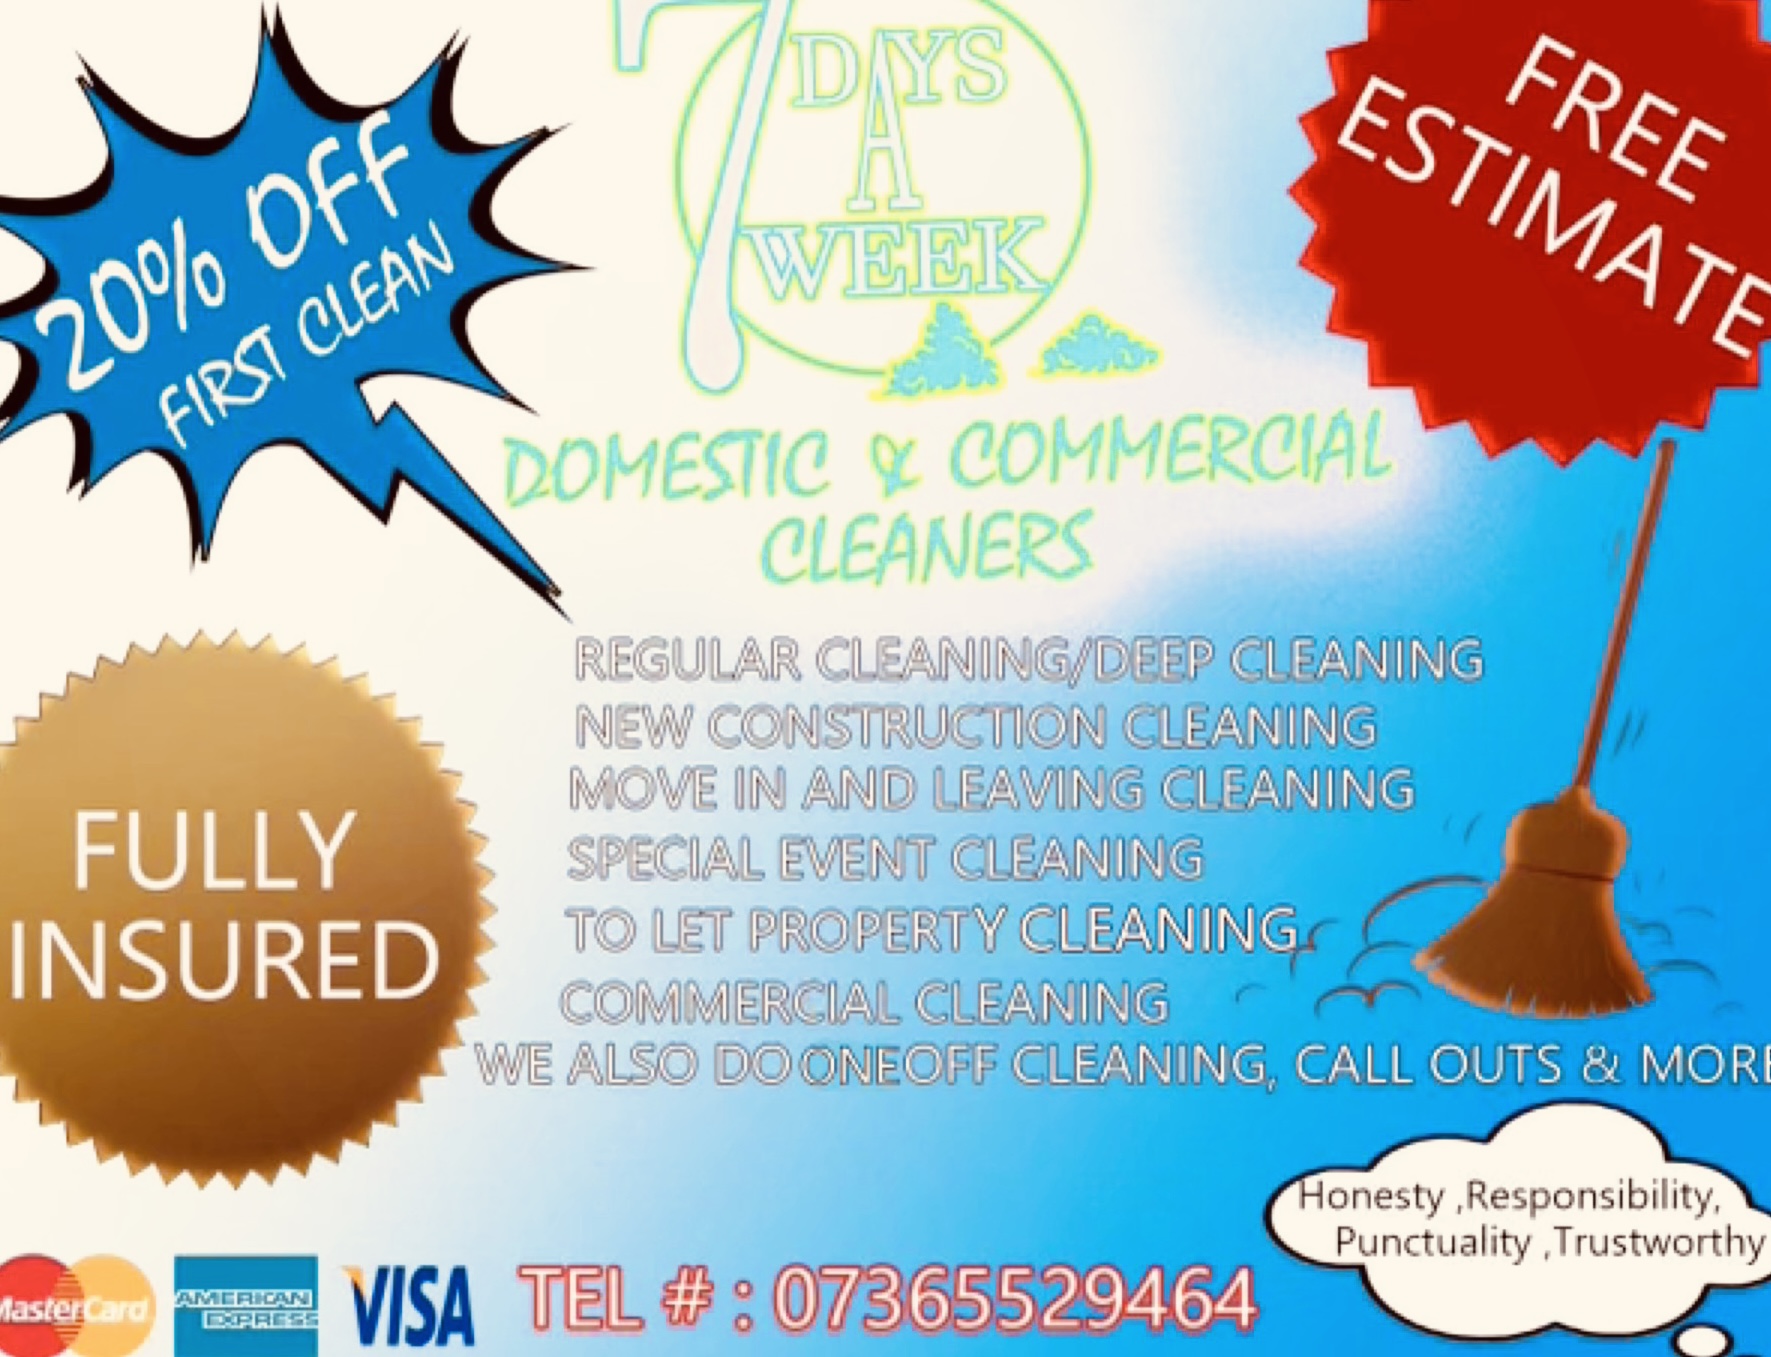 7 days a week domestic and commercial cleaners Ltd 